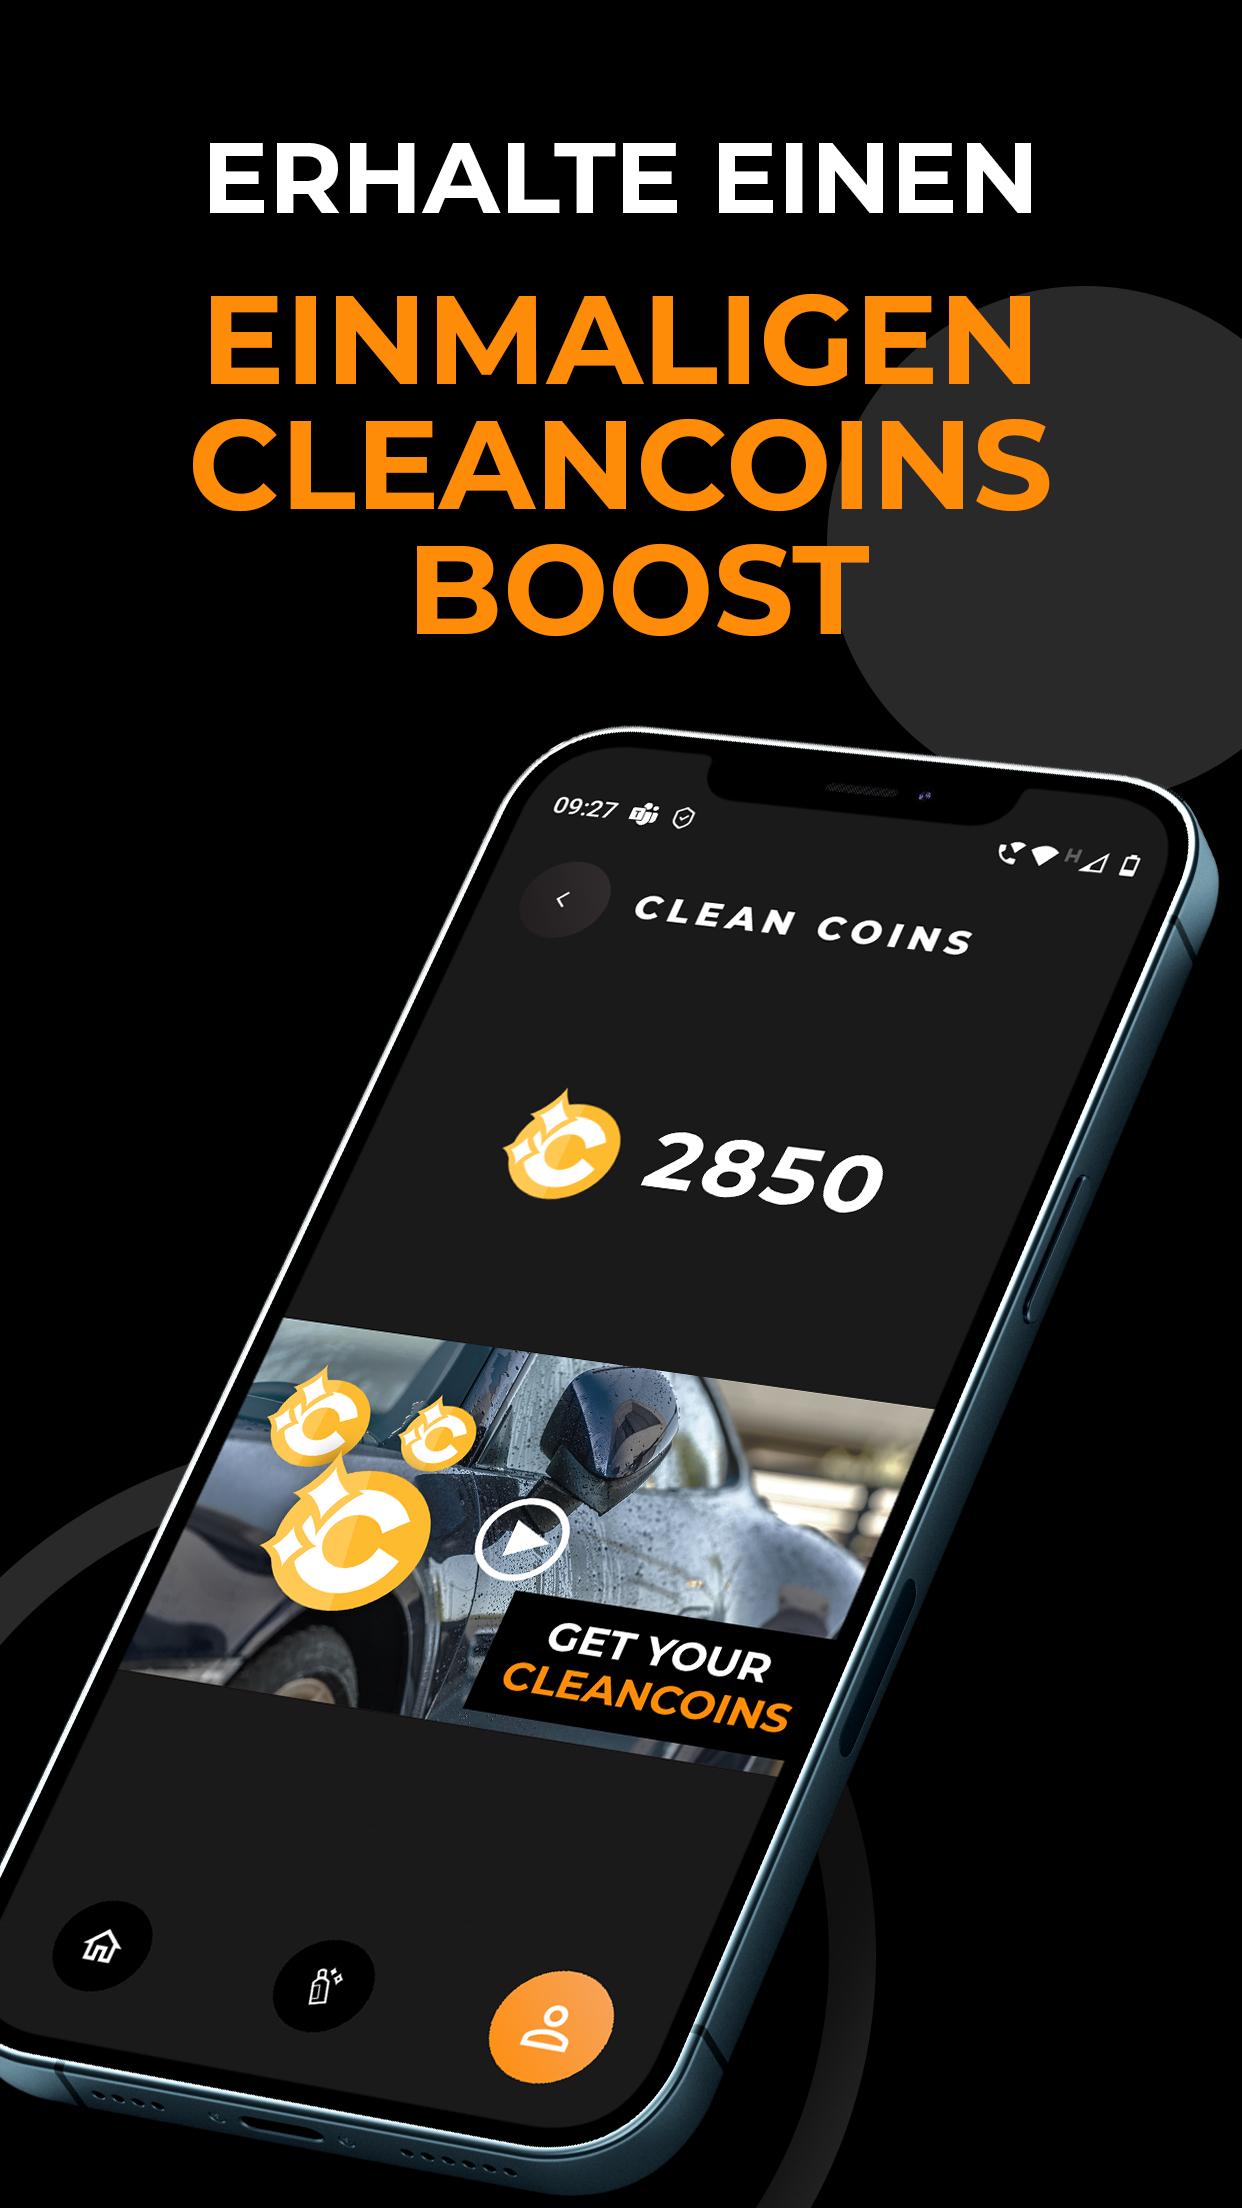 CarCare App by Area52 1.0.9 Screenshot 12